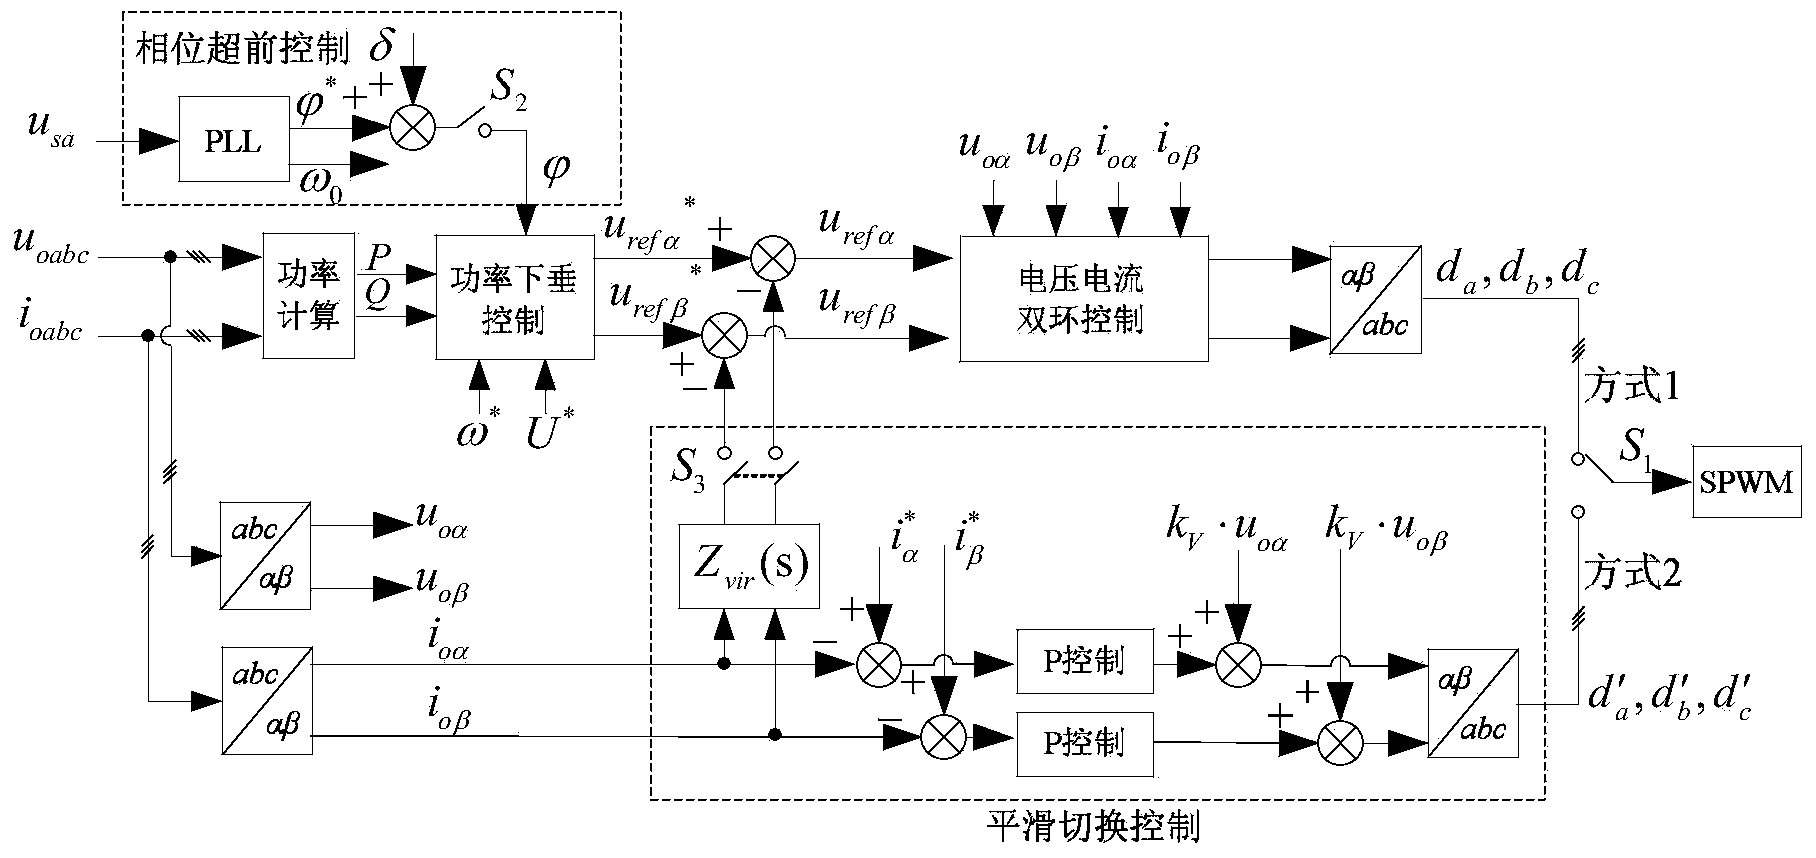 Smooth switching control method for three-phase dual-mode inverter